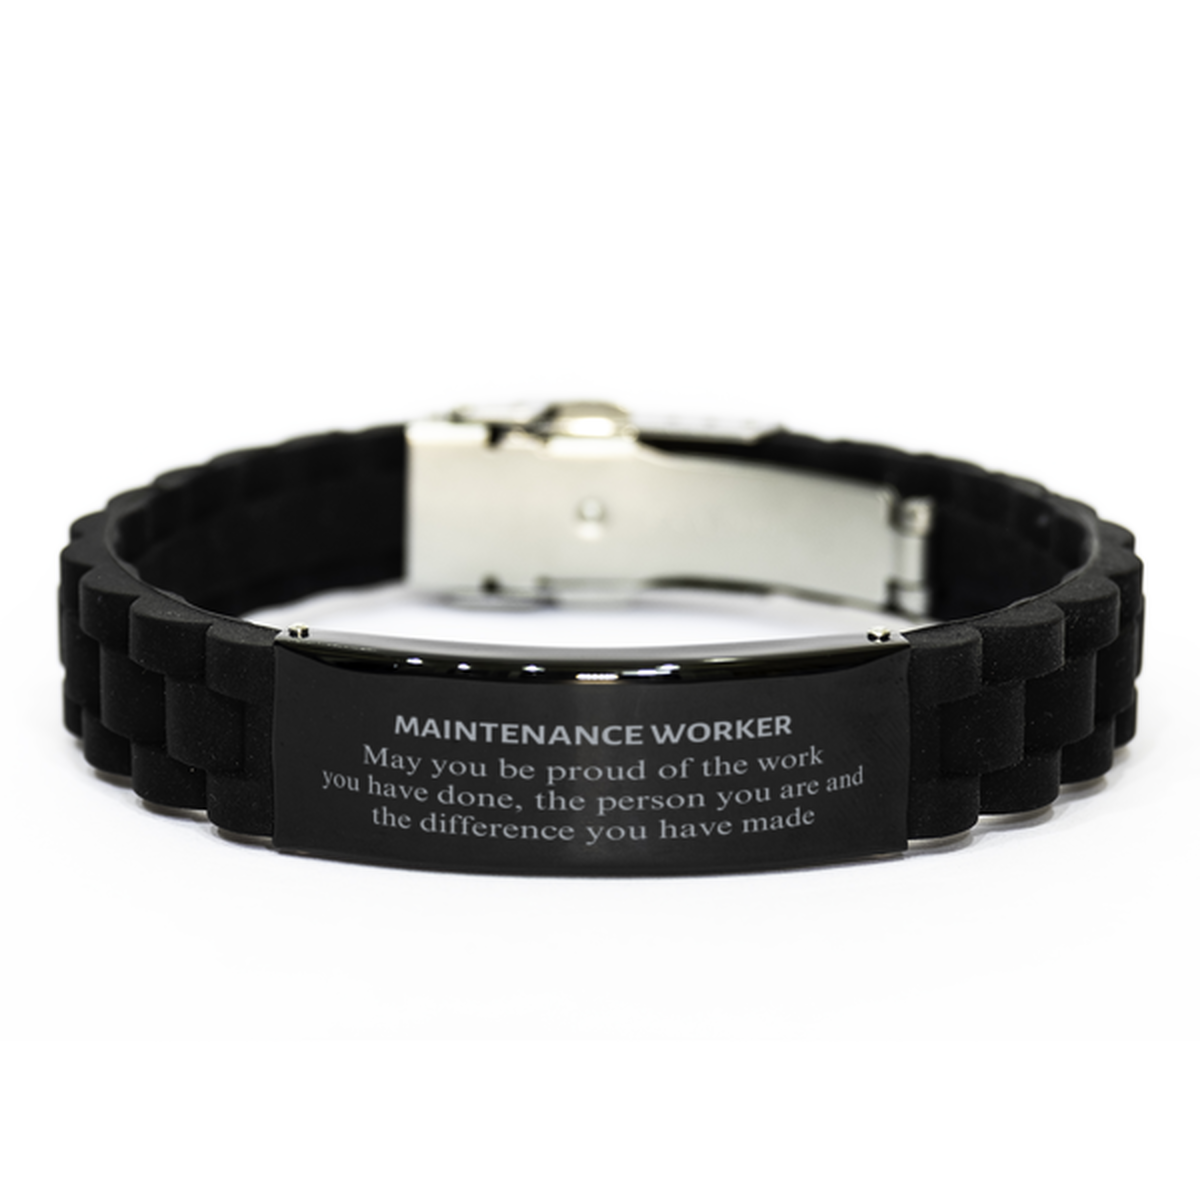 Maintenance Worker May you be proud of the work you have done, Retirement Maintenance Worker Black Glidelock Clasp Bracelet for Colleague Appreciation Gifts Amazing for Maintenance Worker